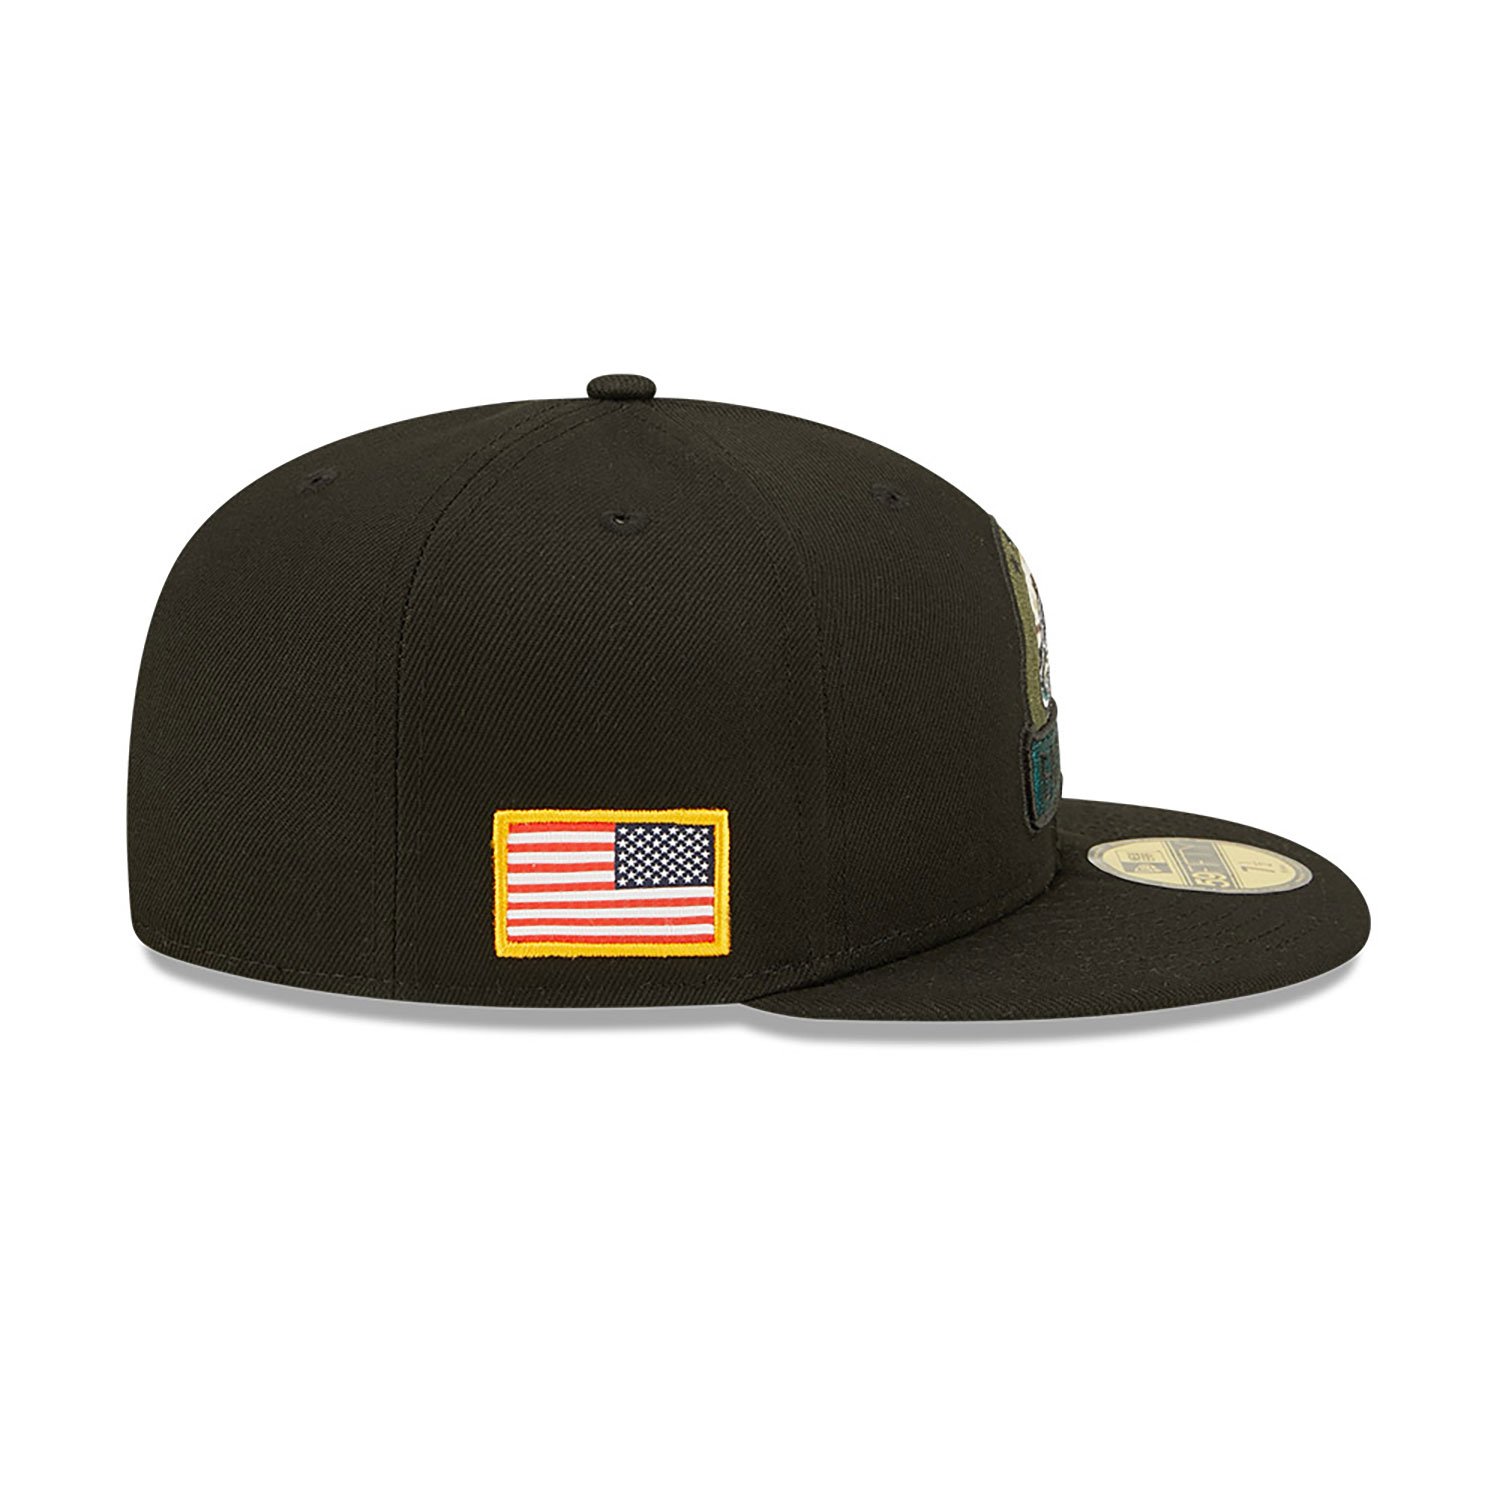 Philadelphia Eagles NFL Salute to Service Black 59FIFTY Fitted Cap